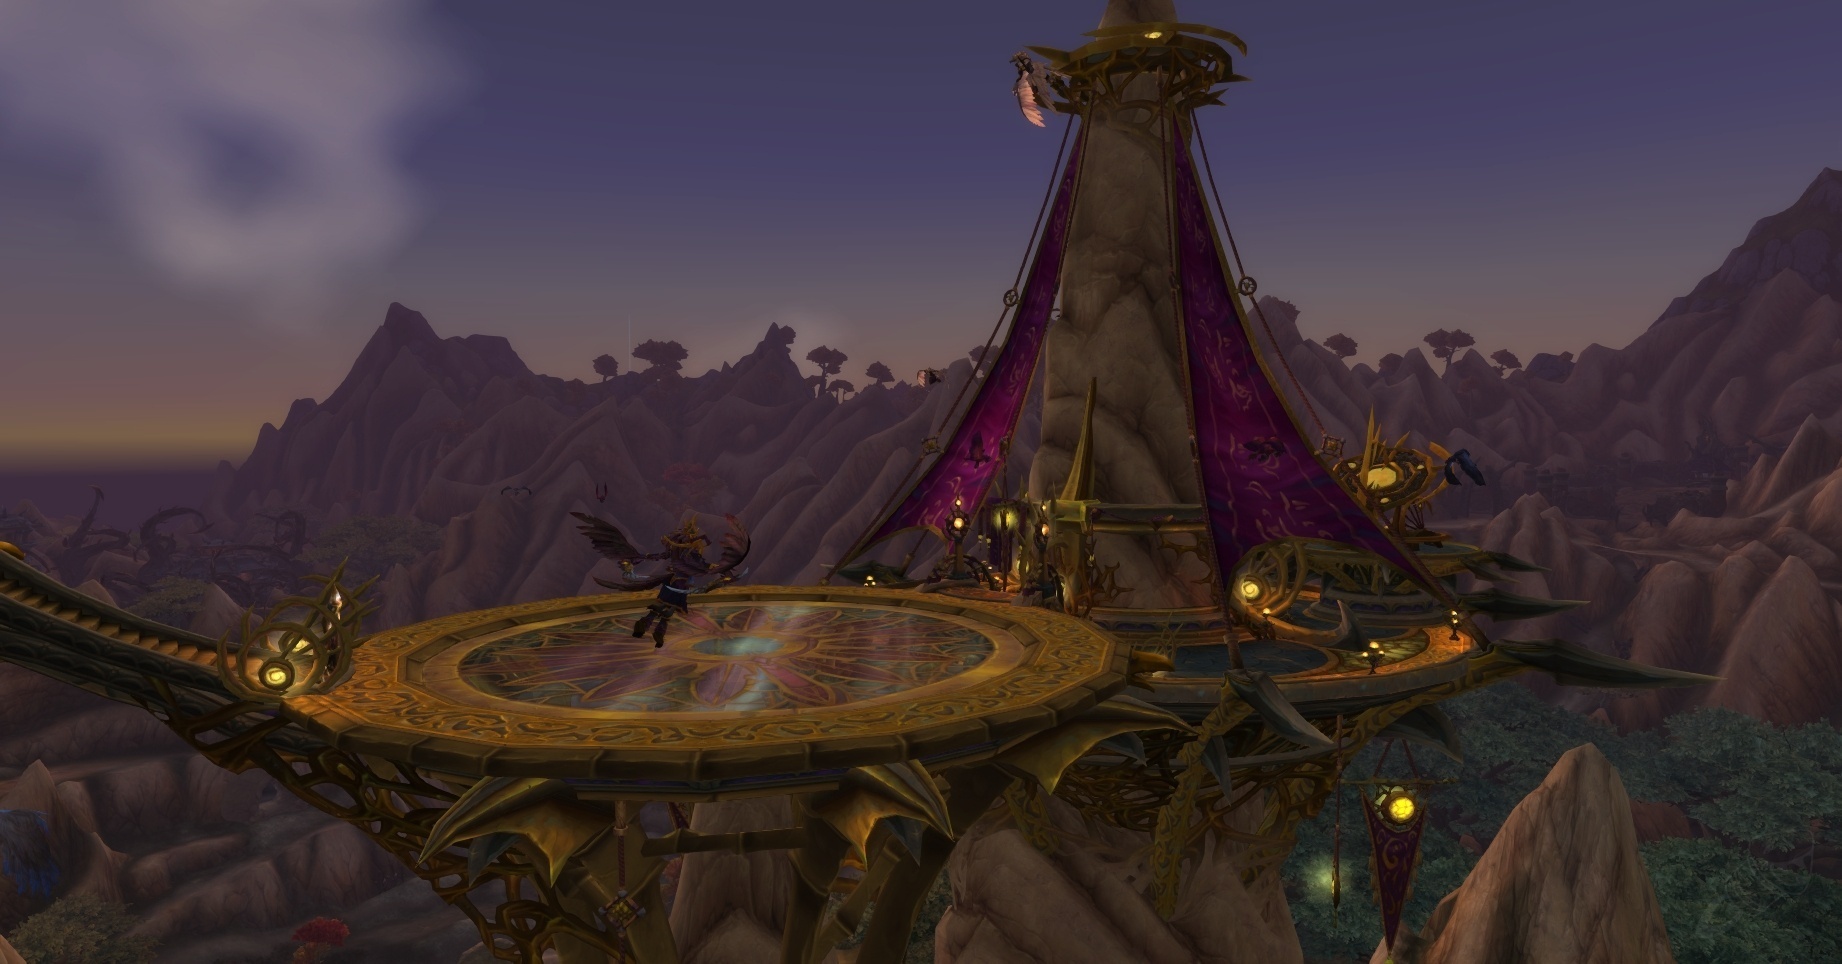 New Events in WoW for May 28th - Warlords of Draenor Timewalking, PvP Brawl...